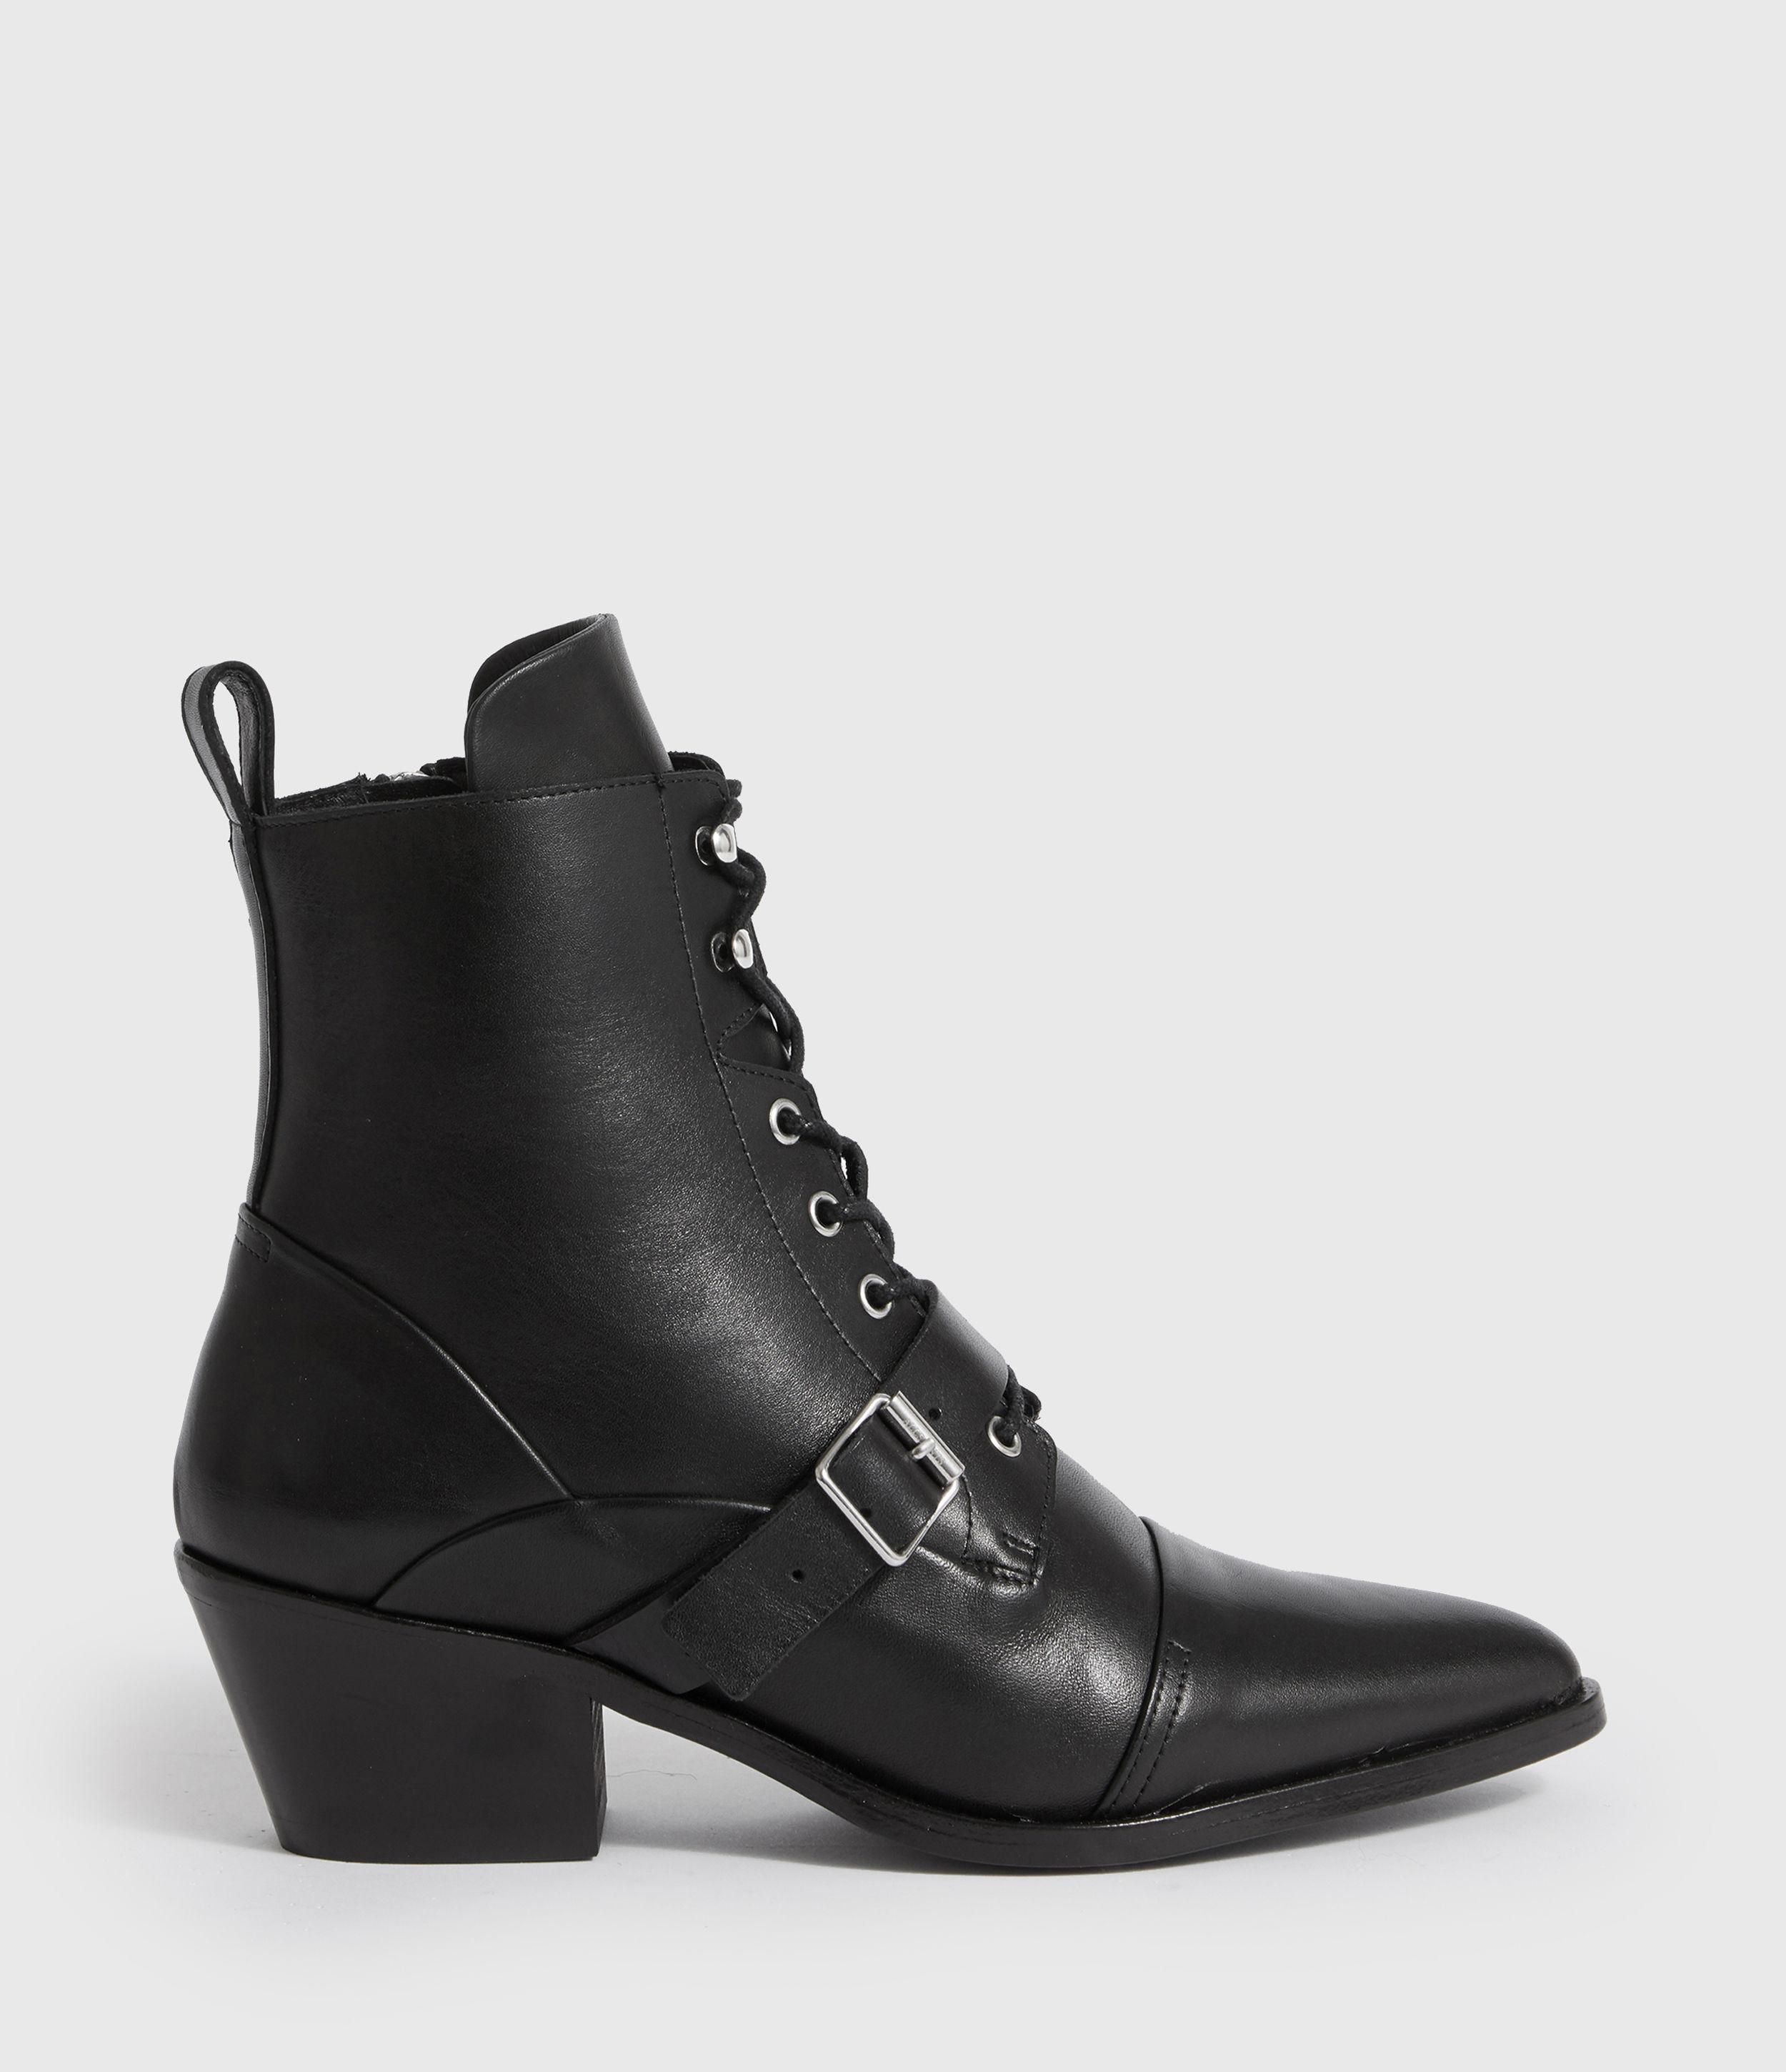 AllSaints Women's Calf Leather Katy Stacked Heel Boots in Black - Lyst